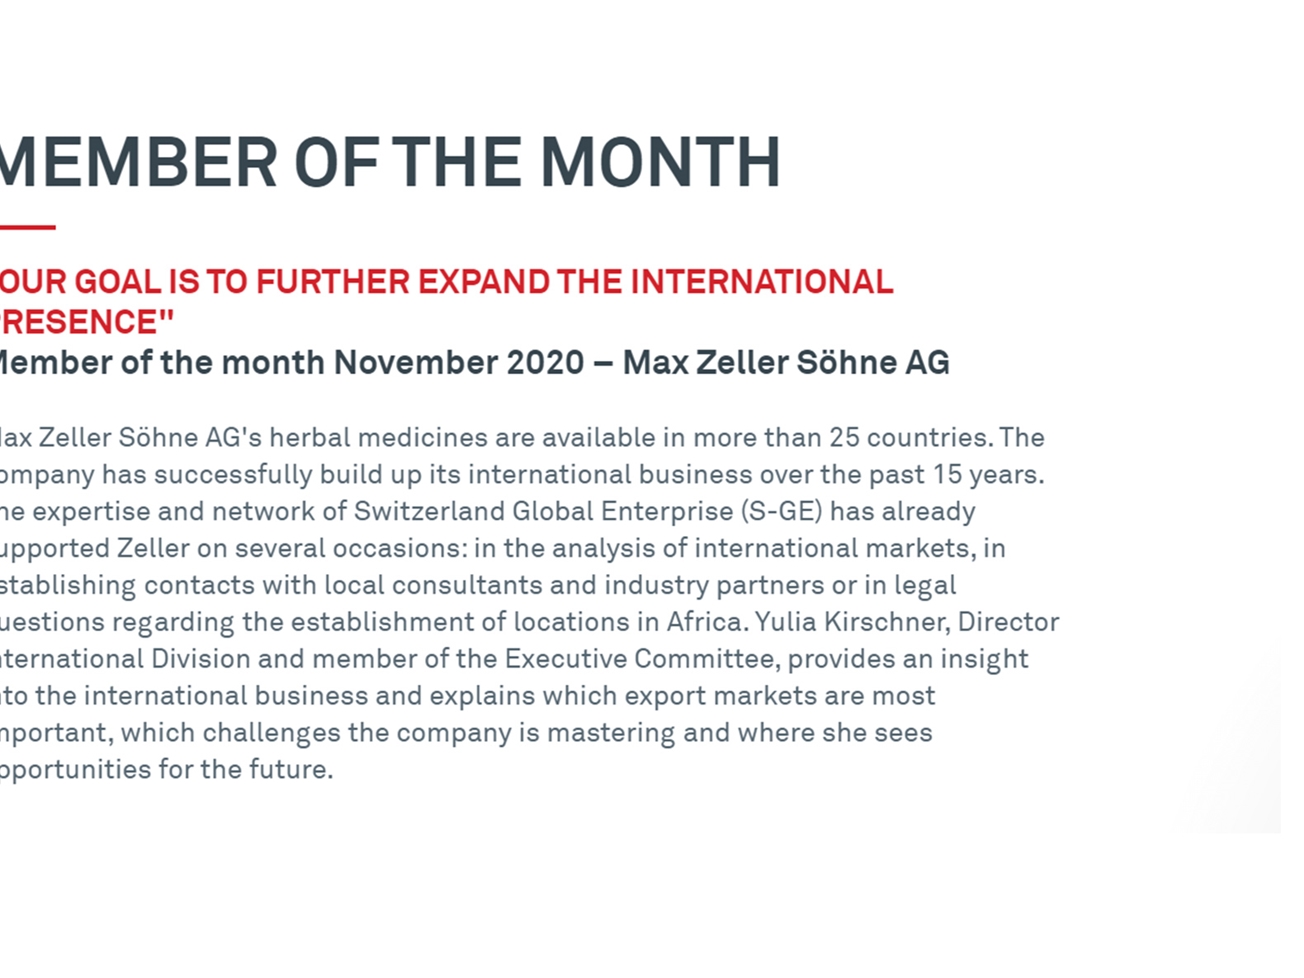 S-GE Member of the month for November 2020